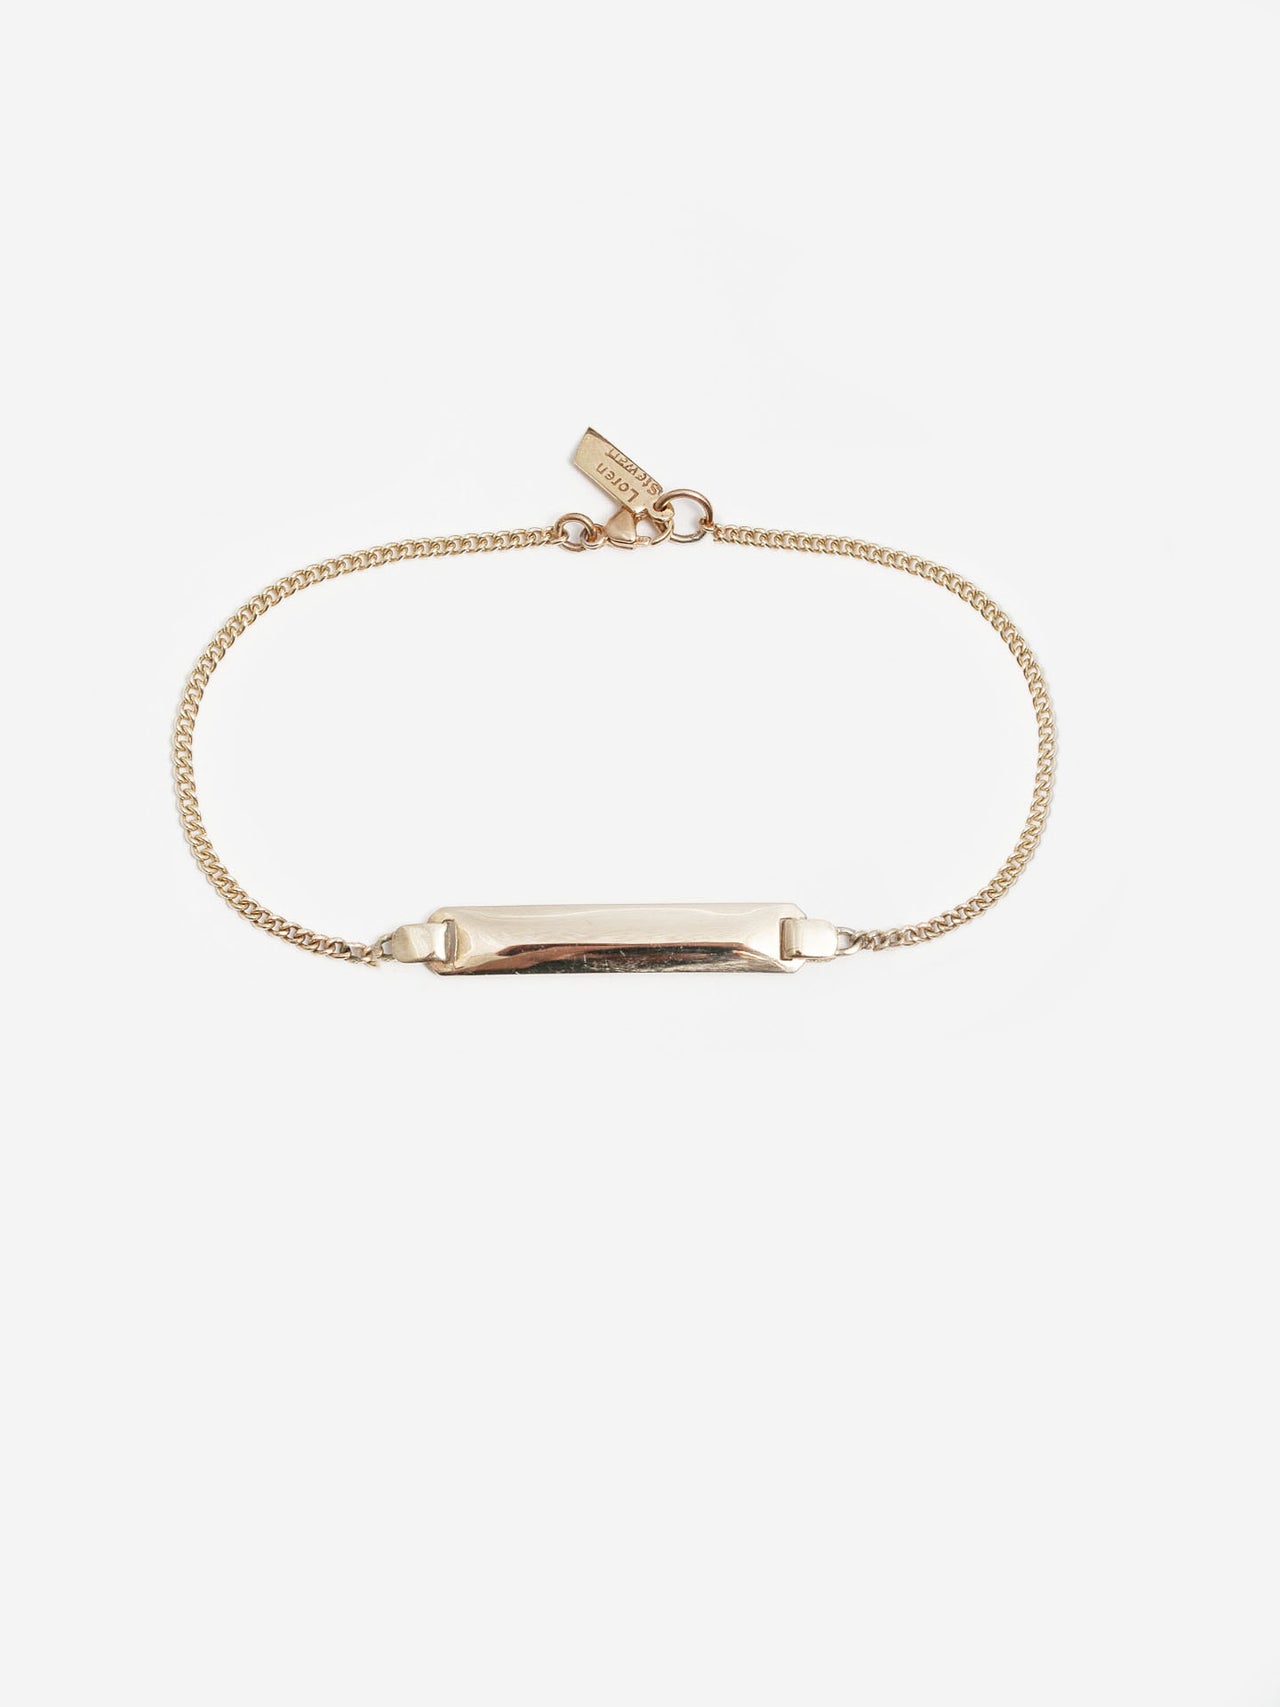 14kt Yellow Gold Mini Watts ID Bracelet pictured on light grey background.